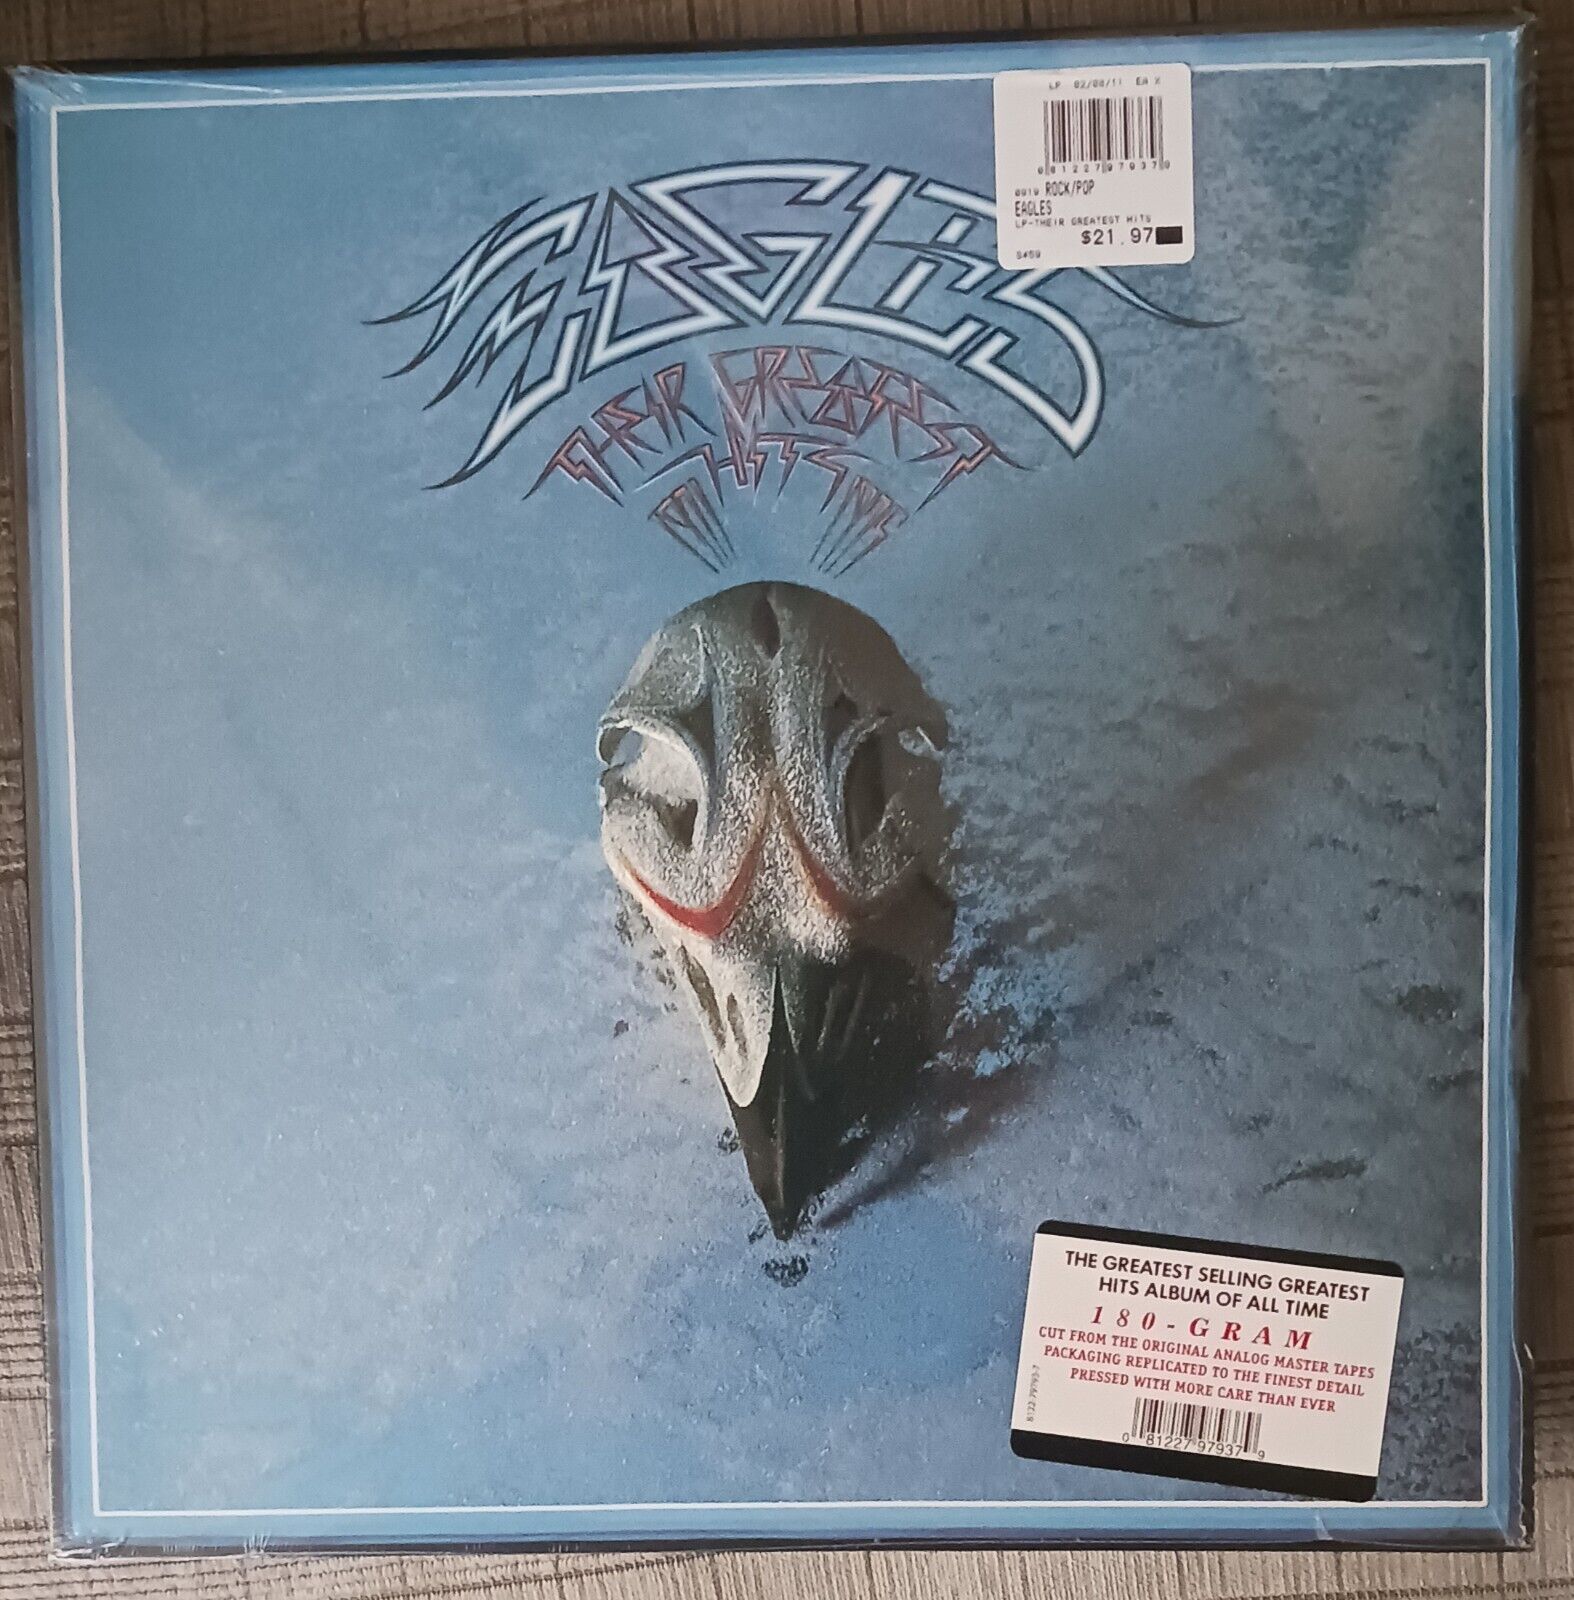 Their Greatest Hits 1971-1975 by Eagles (Record, 2011)